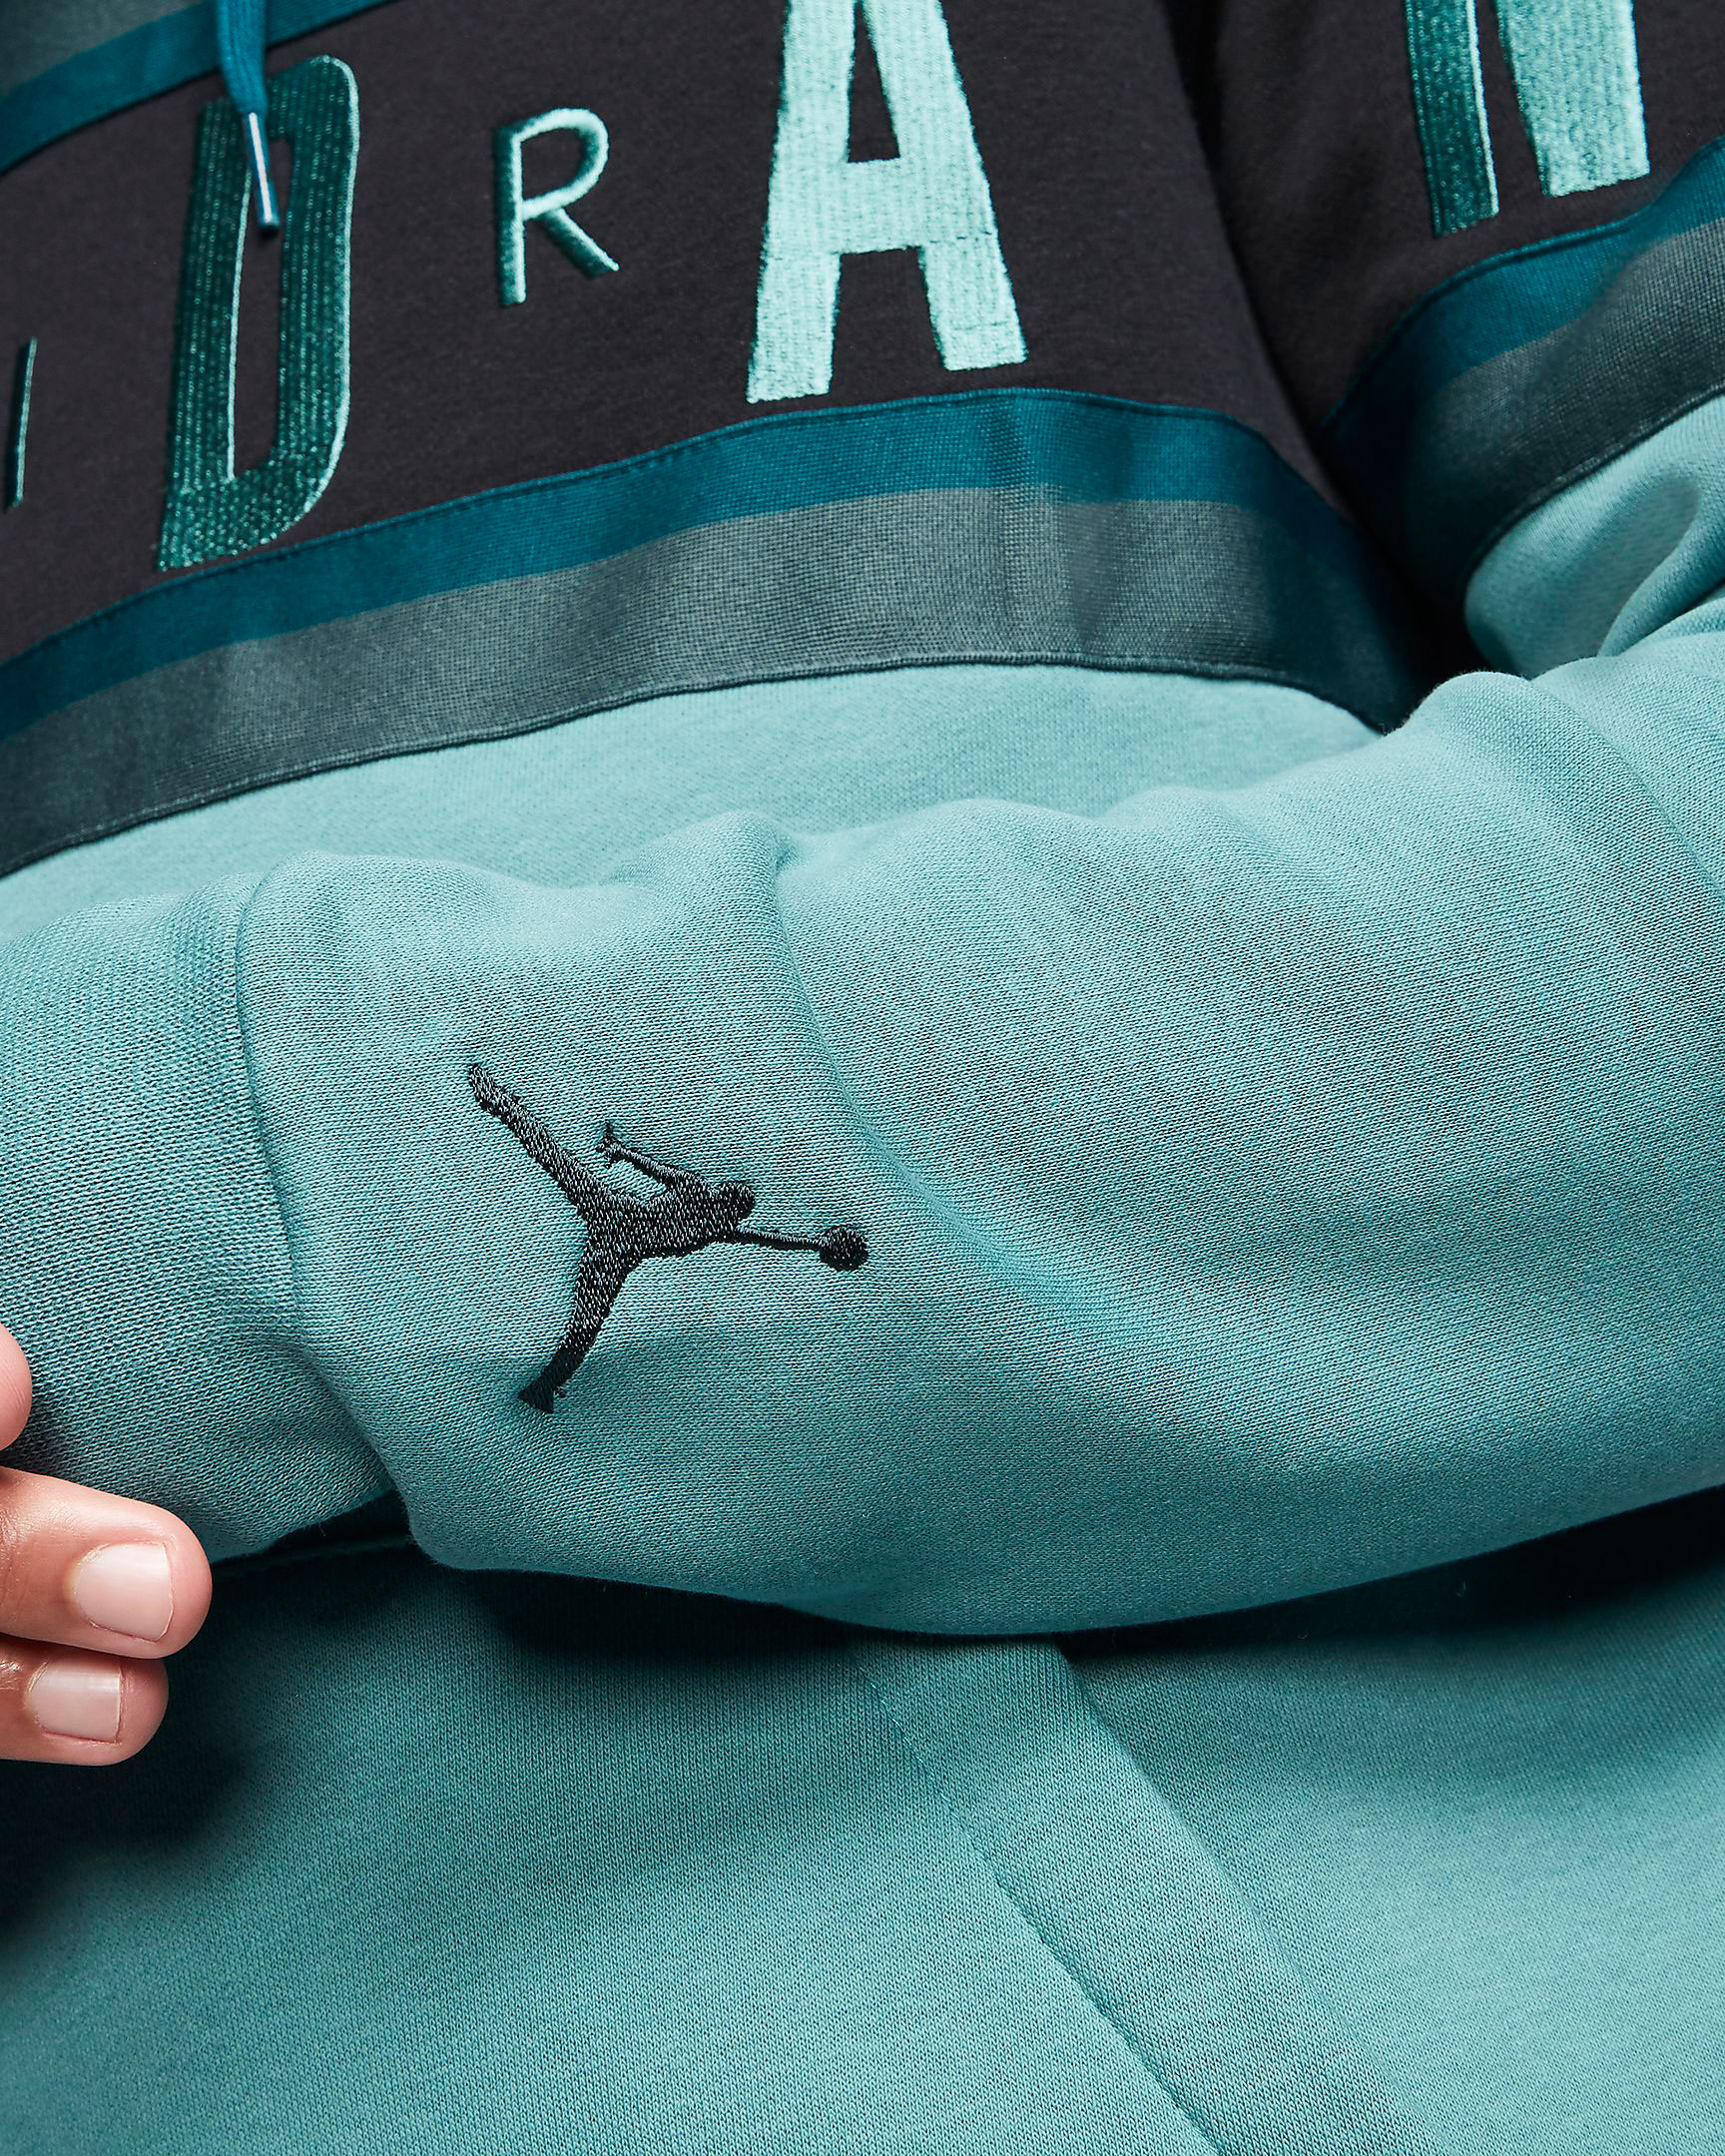 What to Wear With the Air Jordan 13 Island Green | SneakerFits.com